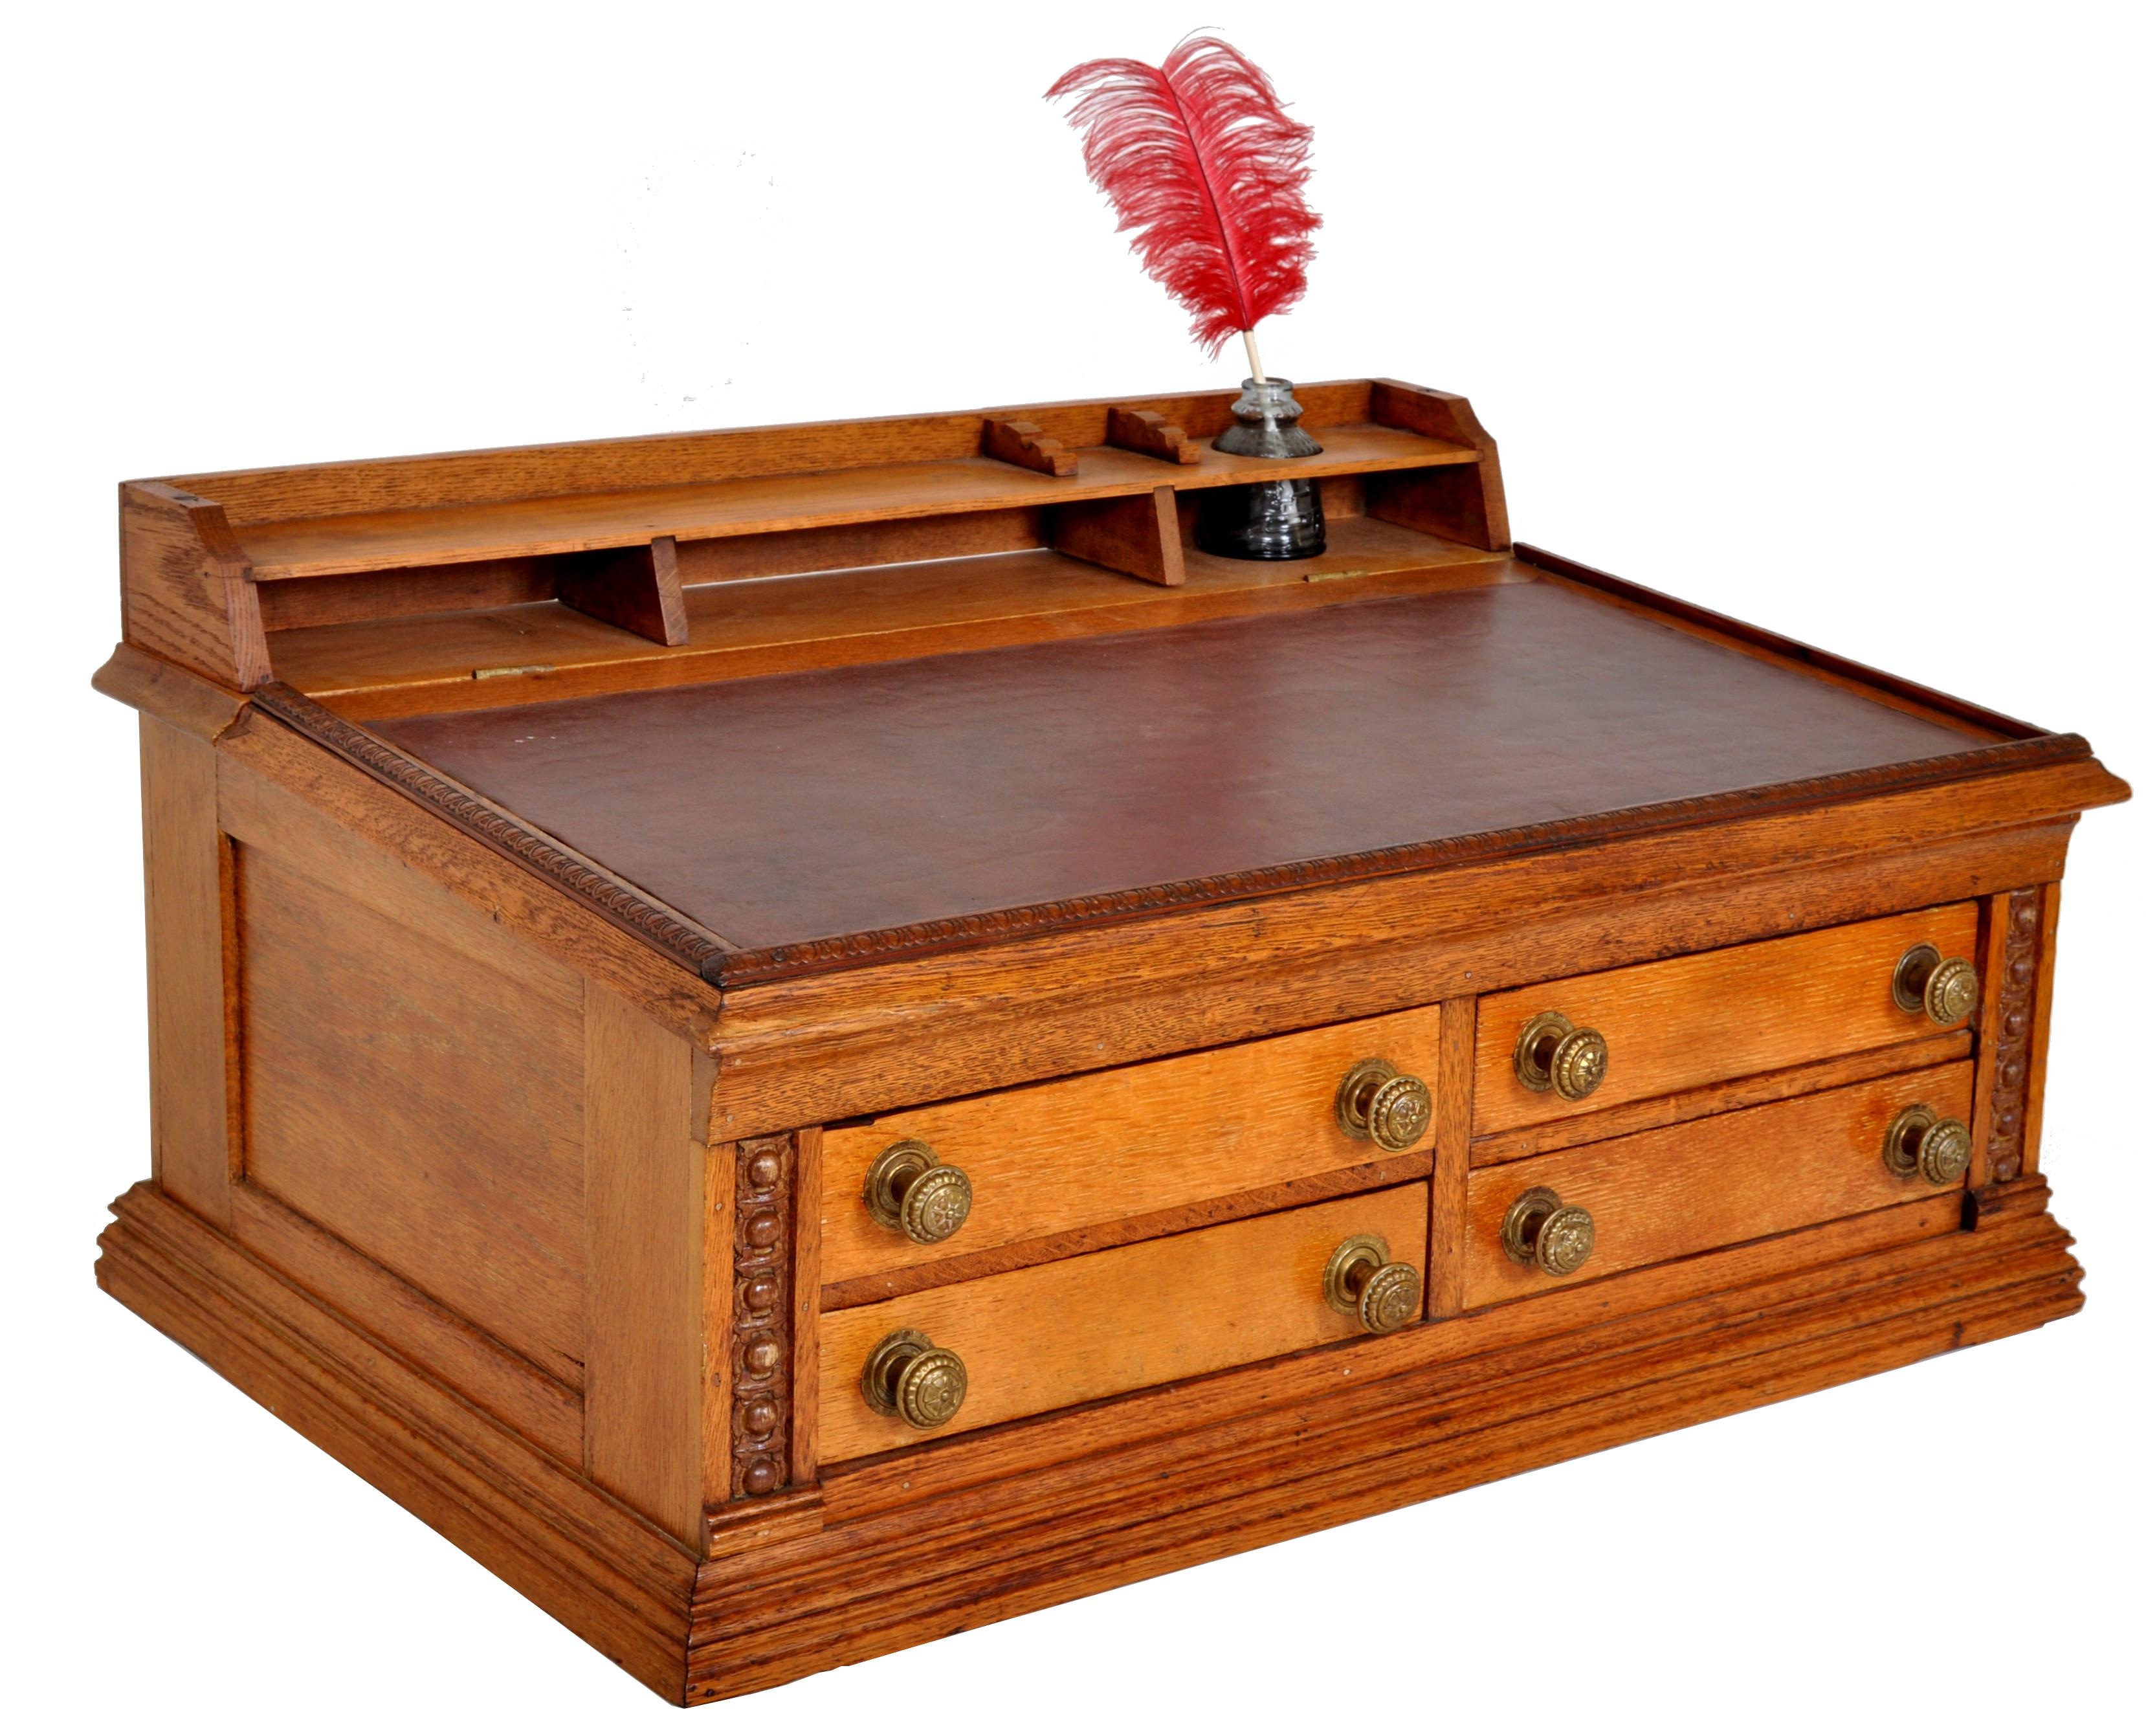 Antique American Clark's O.N.T. oak spool cabinet/mercantile desk, circa 1900. The top with fitted inkwell and pigeon holes. The lift-up sloped writing surface fitted with leather and enclosing a storage reservoir for papers. The base having four